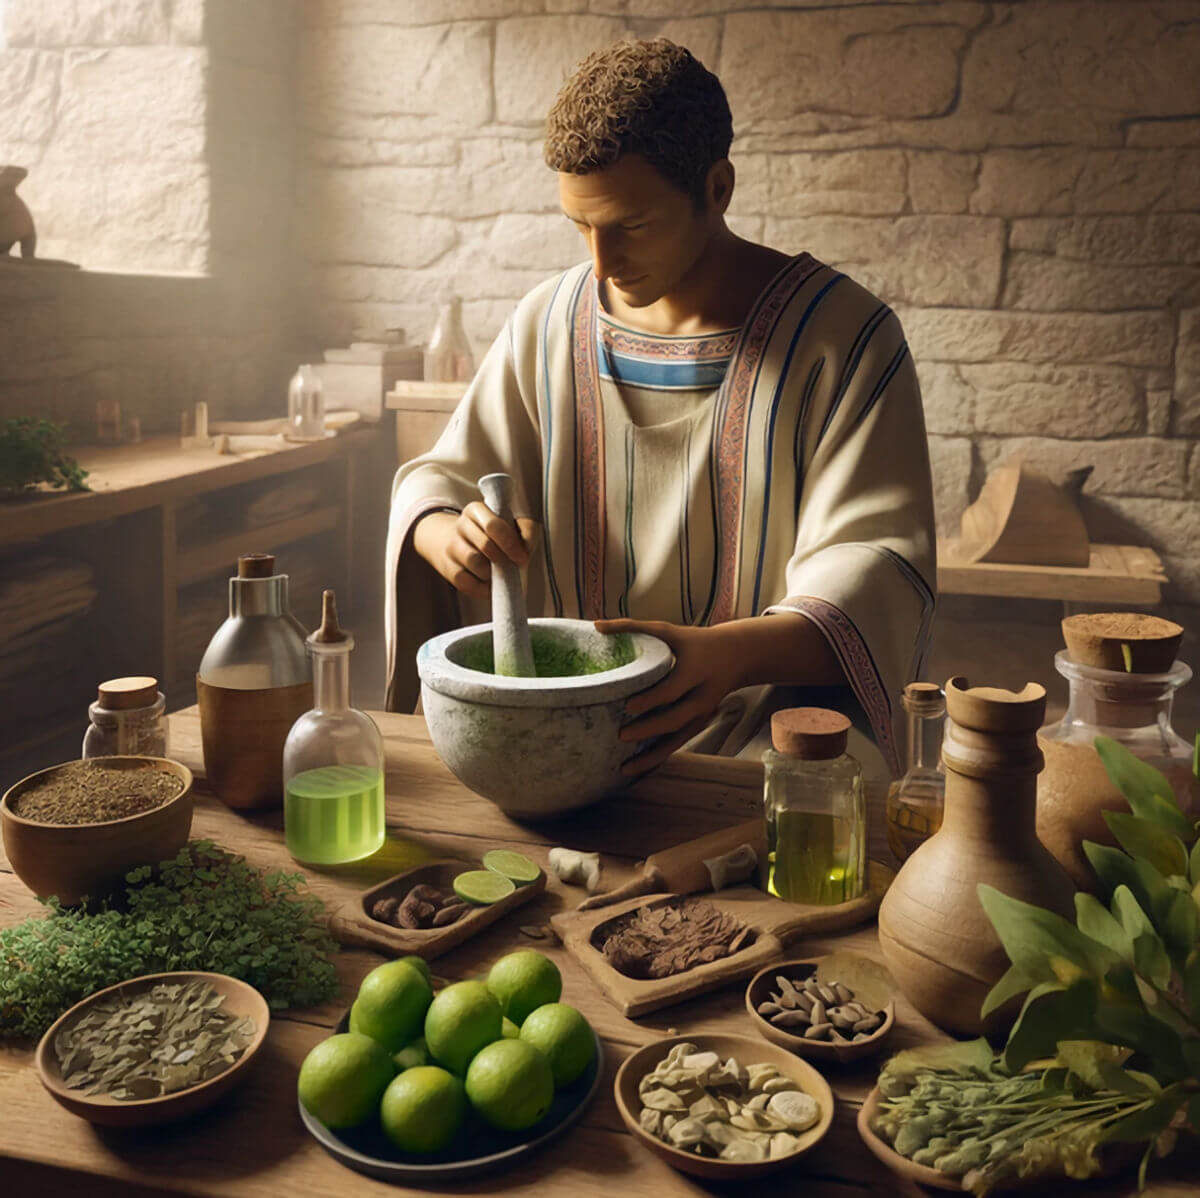 An ancient Roman physician creating a paste using limes and other ingredients